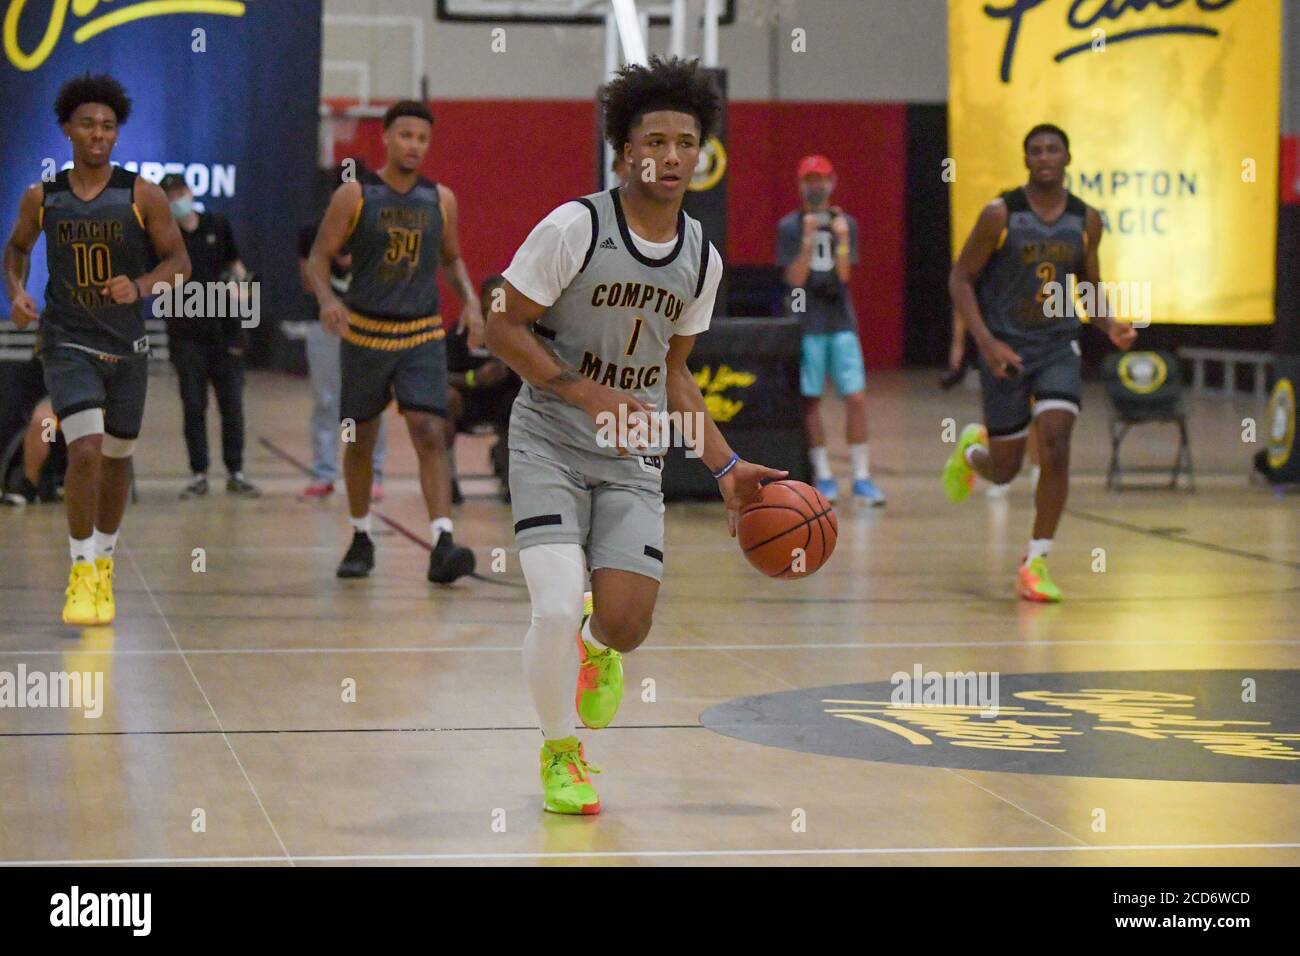 Corona, United States. 22nd Aug, 2020. Compton Magic point guard Mikey  Williams of San Ysidro during a Compton Magic tournament at The Draft  Sports Complex, Saturday, Aug. 22, 2020, in Corona, Calif. (